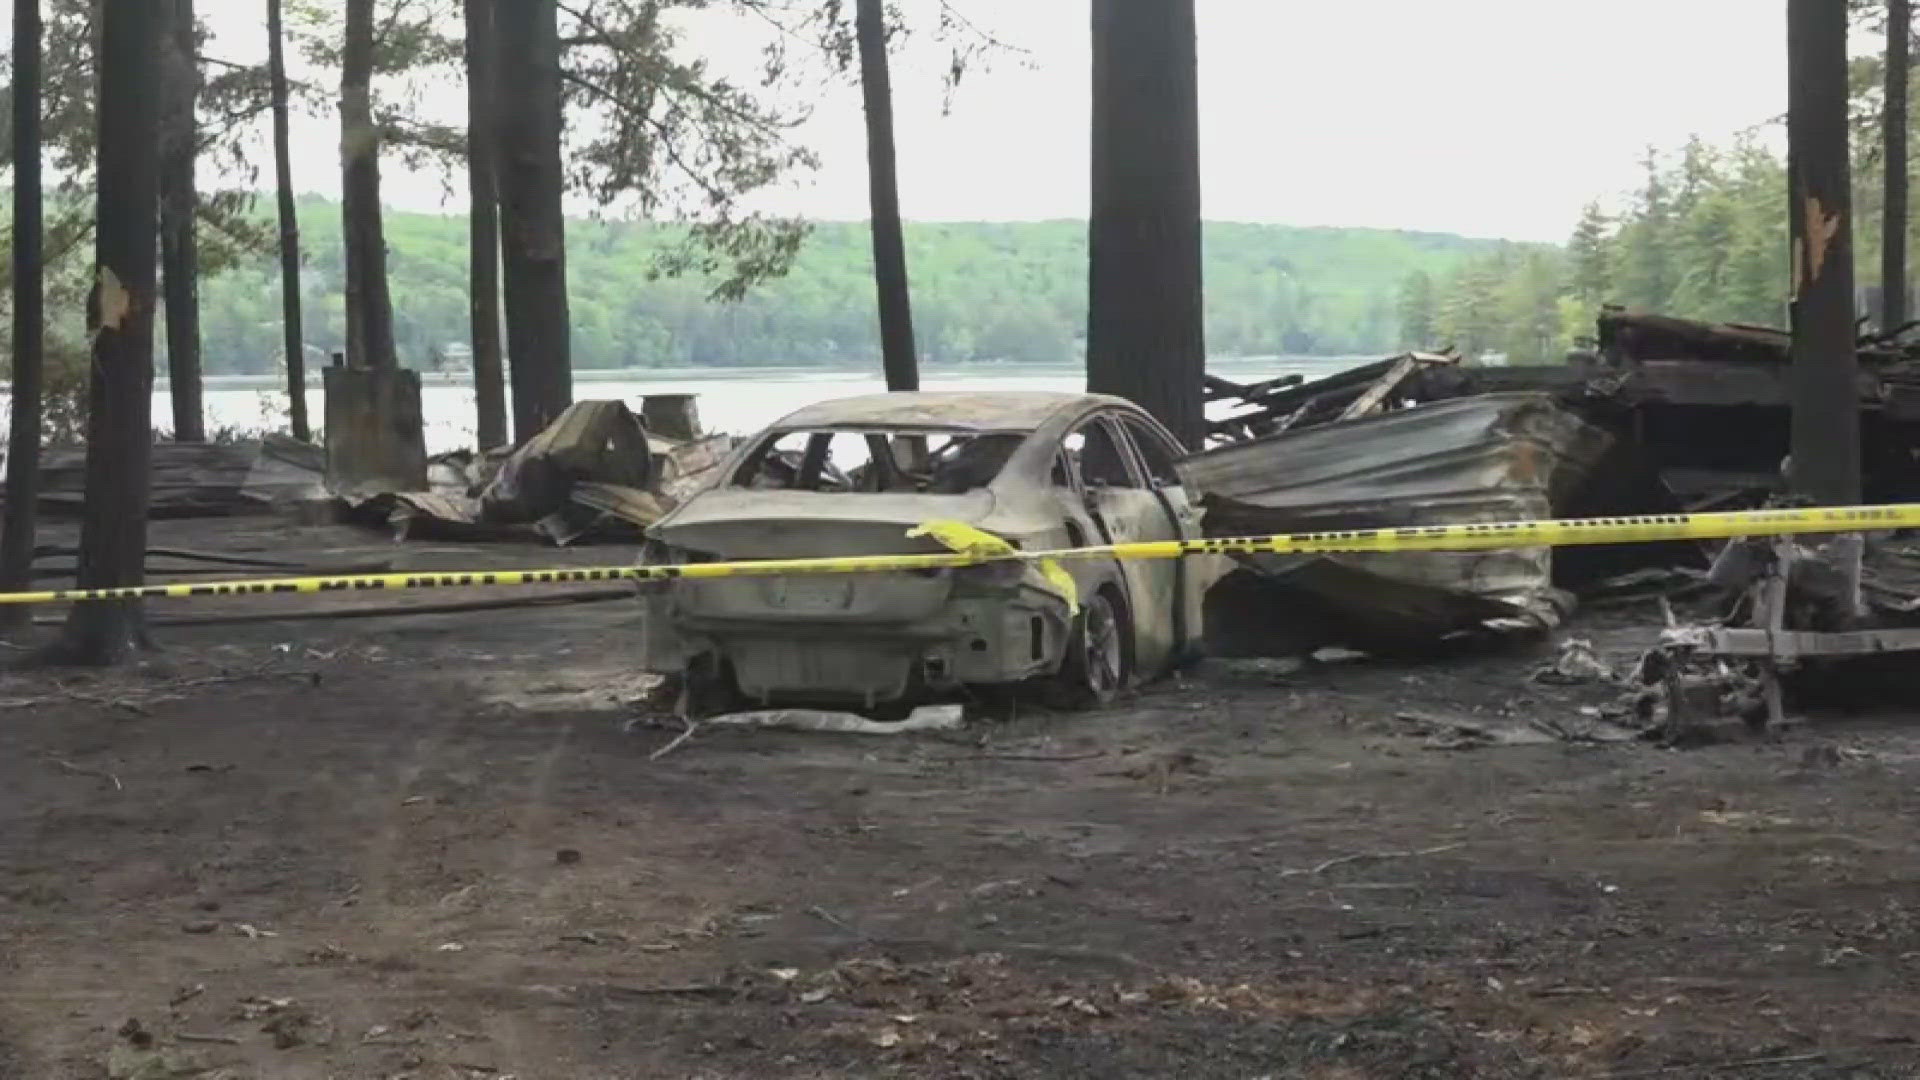 What was reported as a porch fire at a camp on the shores of Little Sebago Lake quickly spread. Flames reached as high as 30 feet.